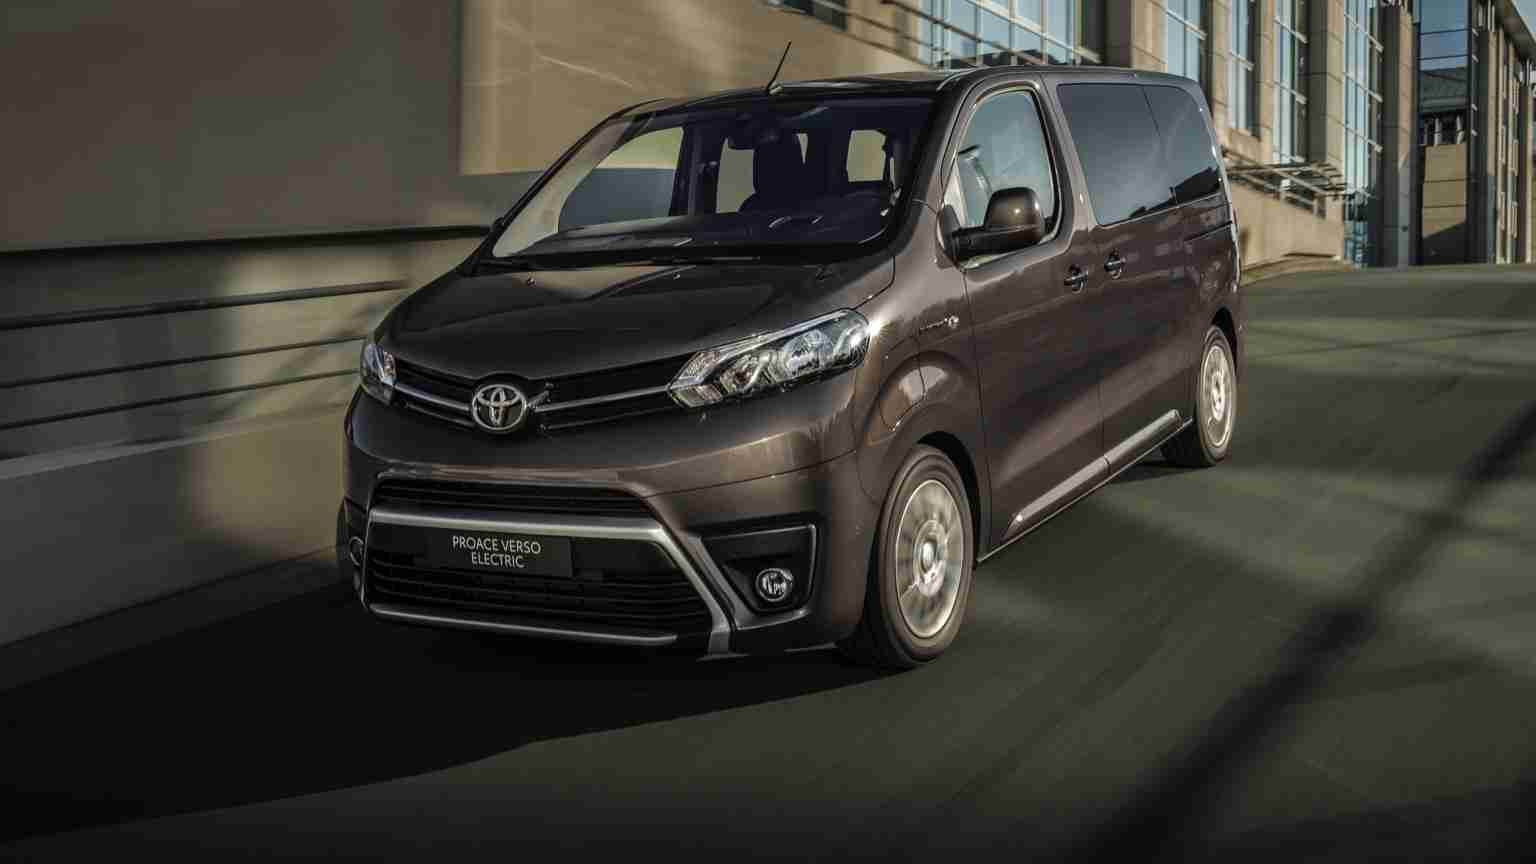 Toyota PROACE Verso M 50 kWh Electric Car